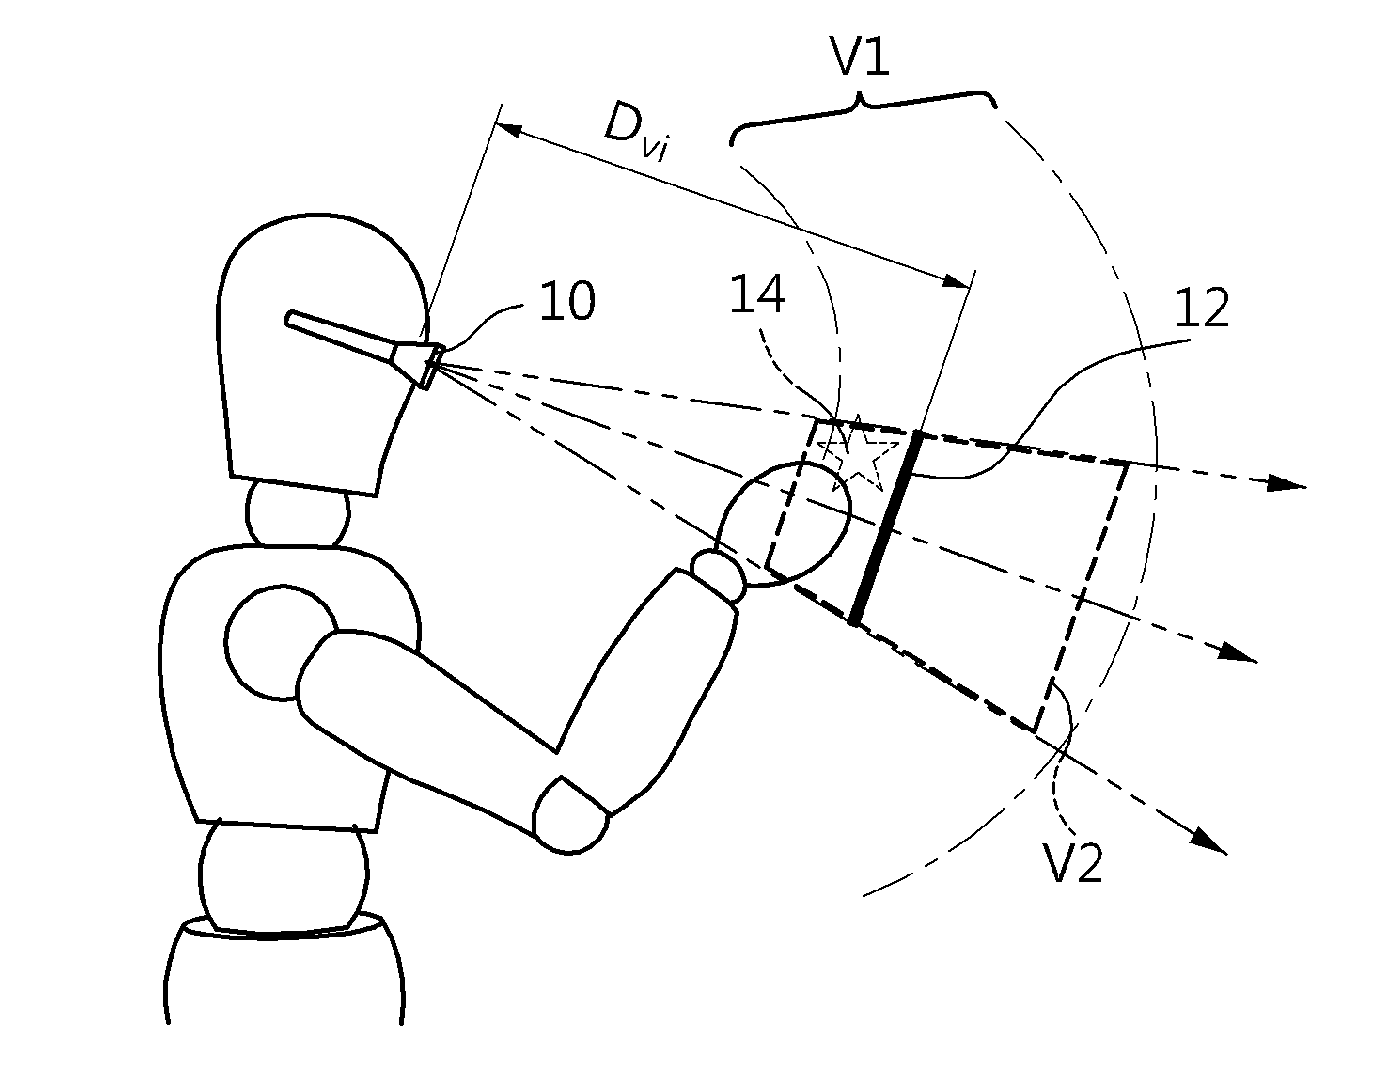 Apparatus and method for designing display for user interaction